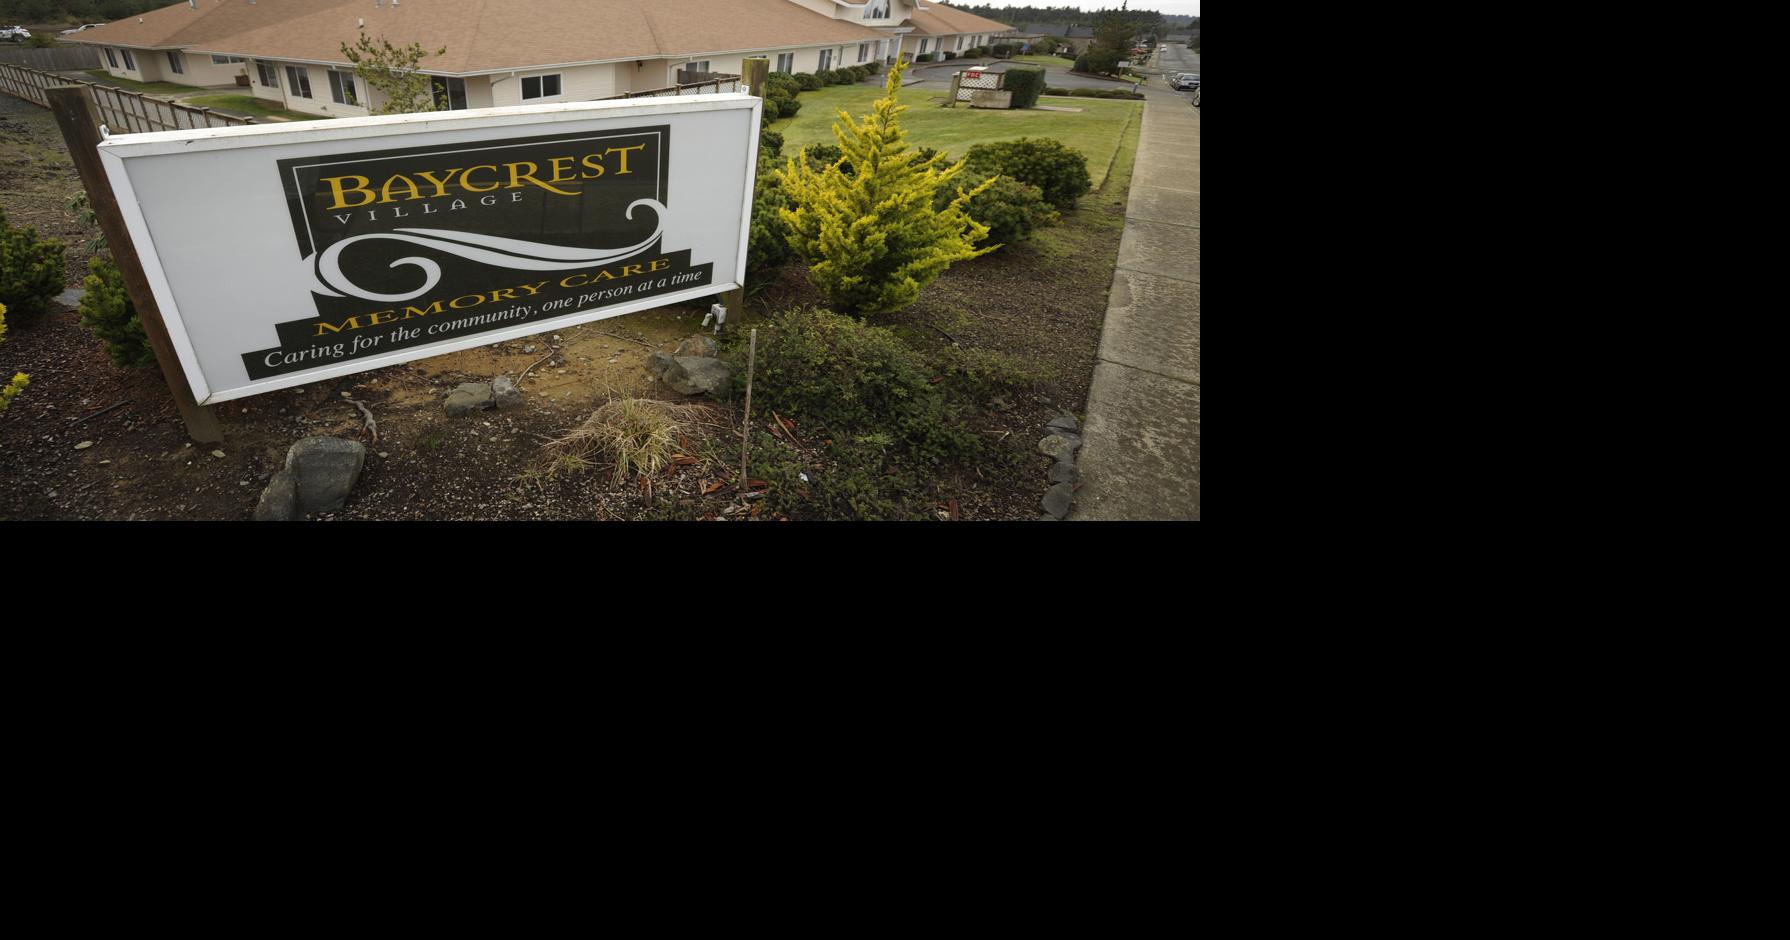 Baycrest Memory Care has closed its doors | Local News ...